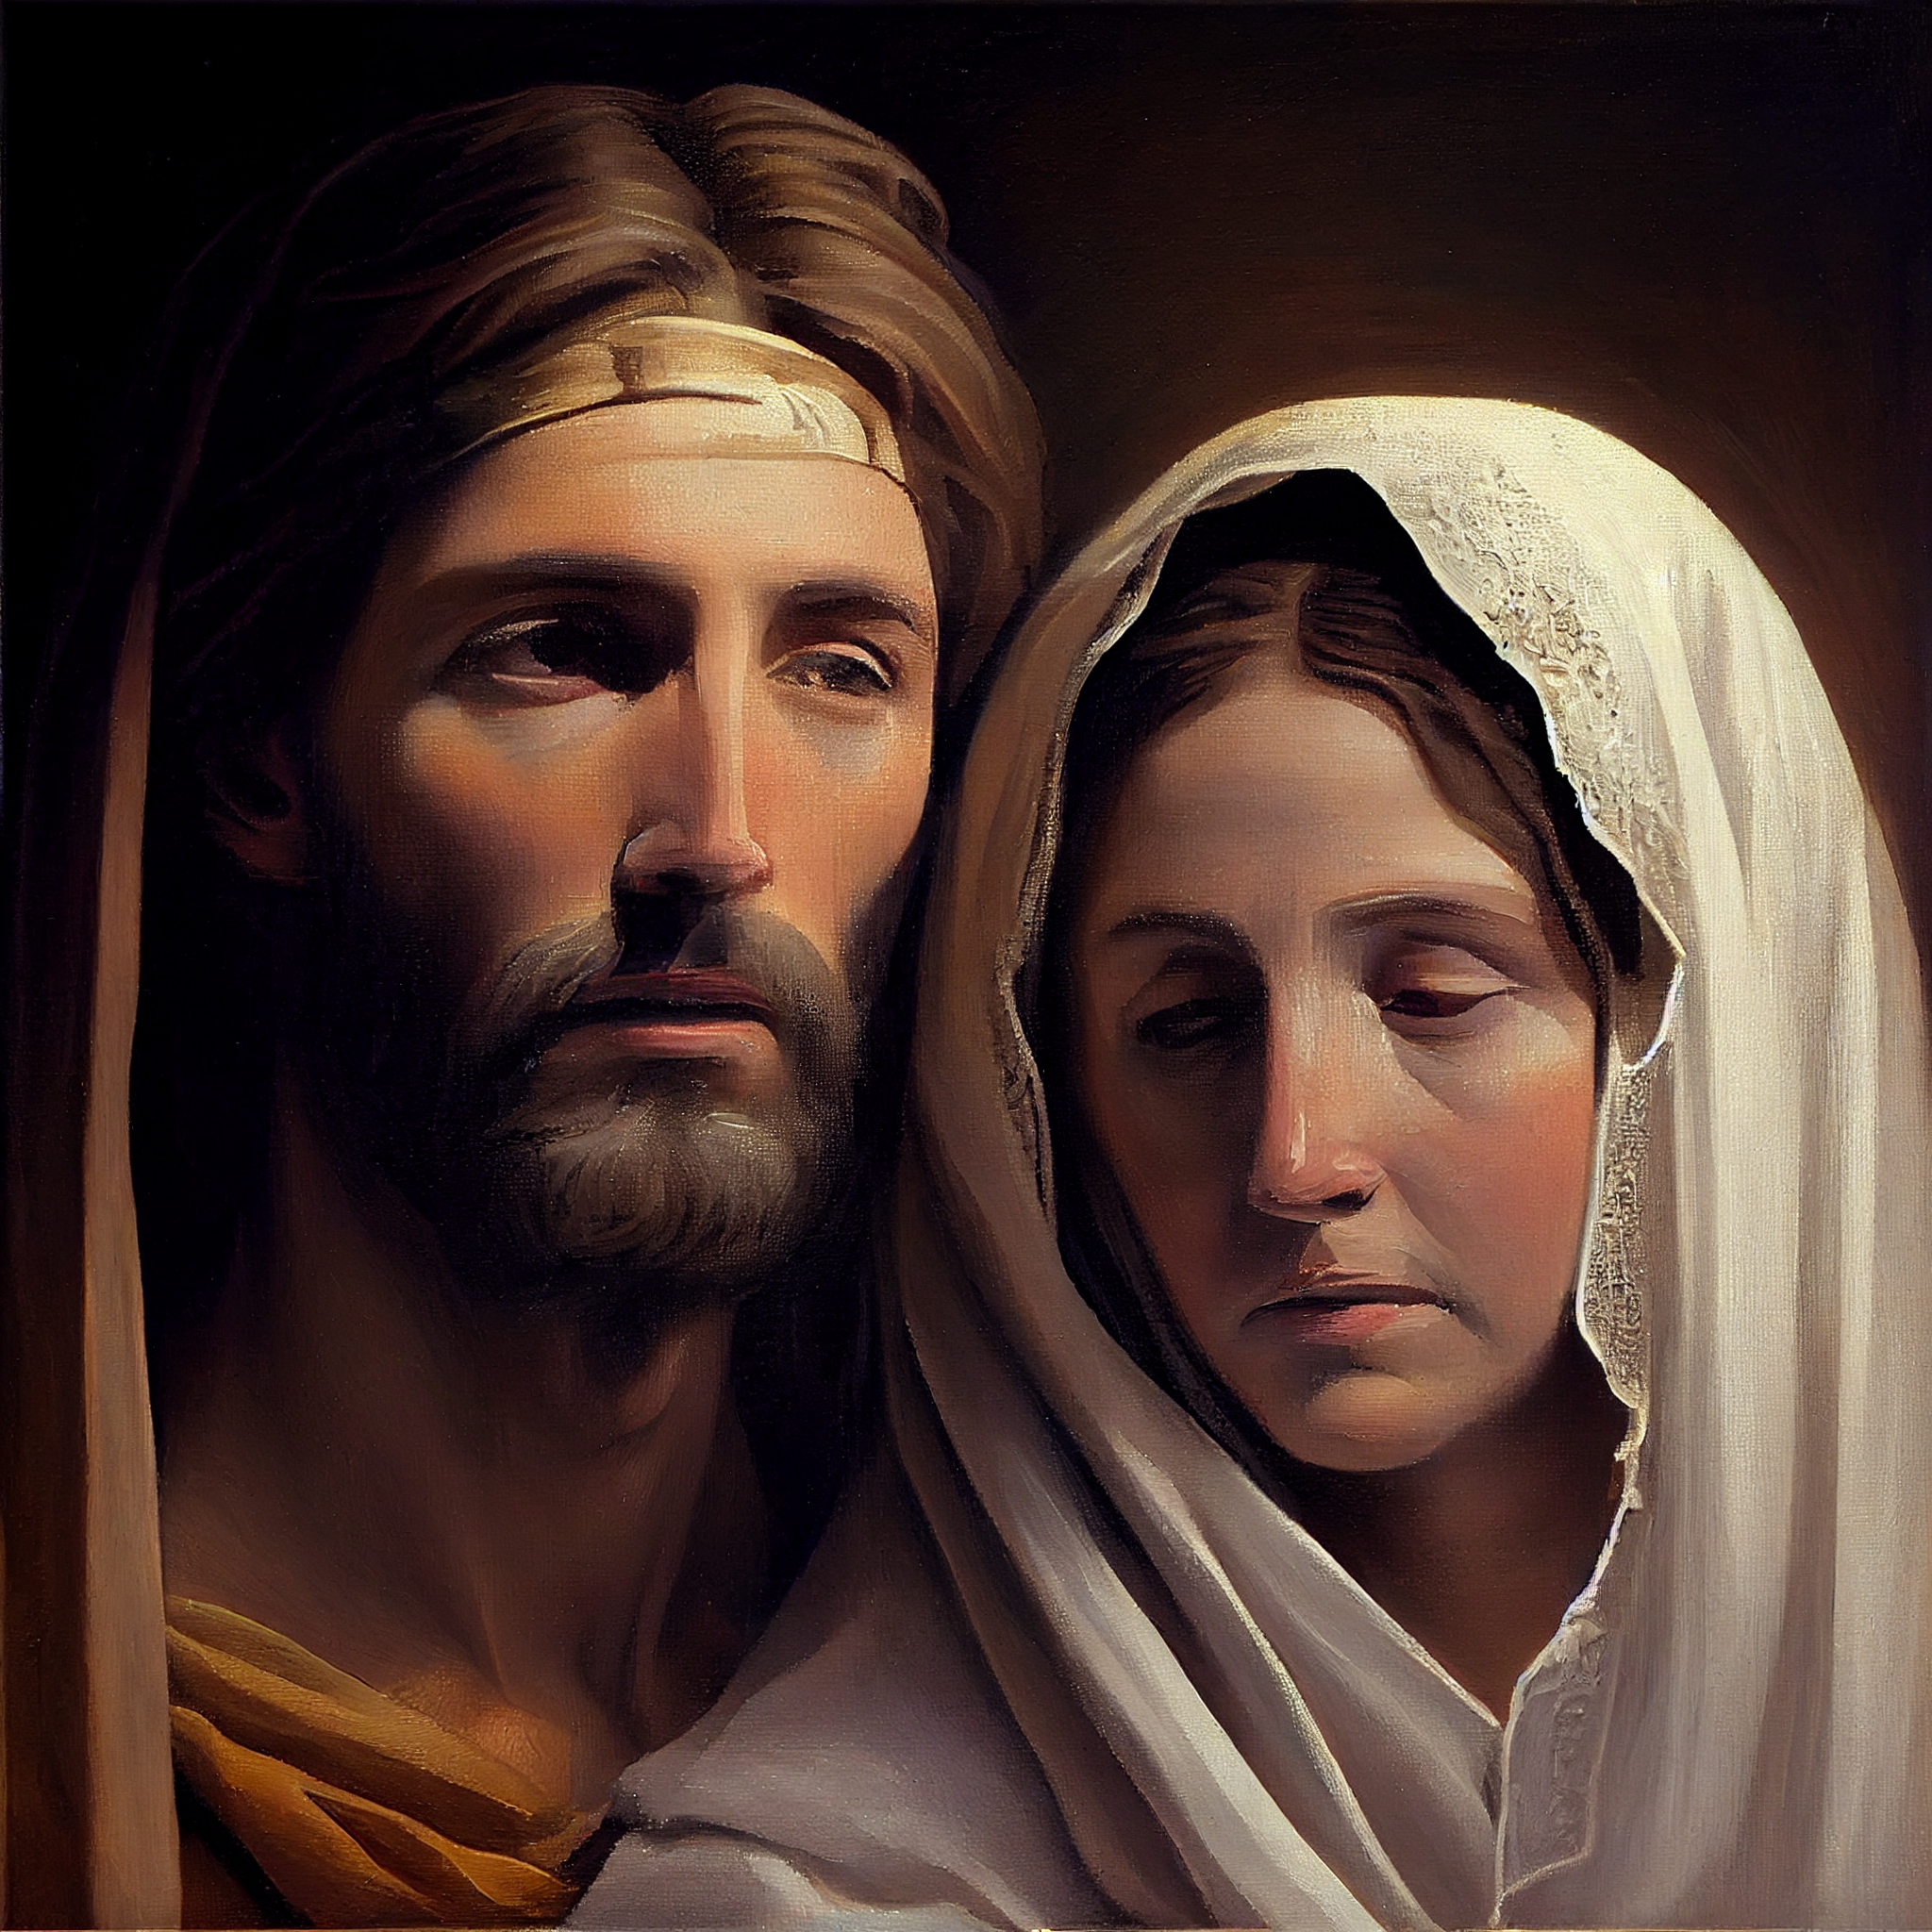 "A Mother's Love: Lord Jesus and Mother Mary in an Exquisite Oil Art Print"